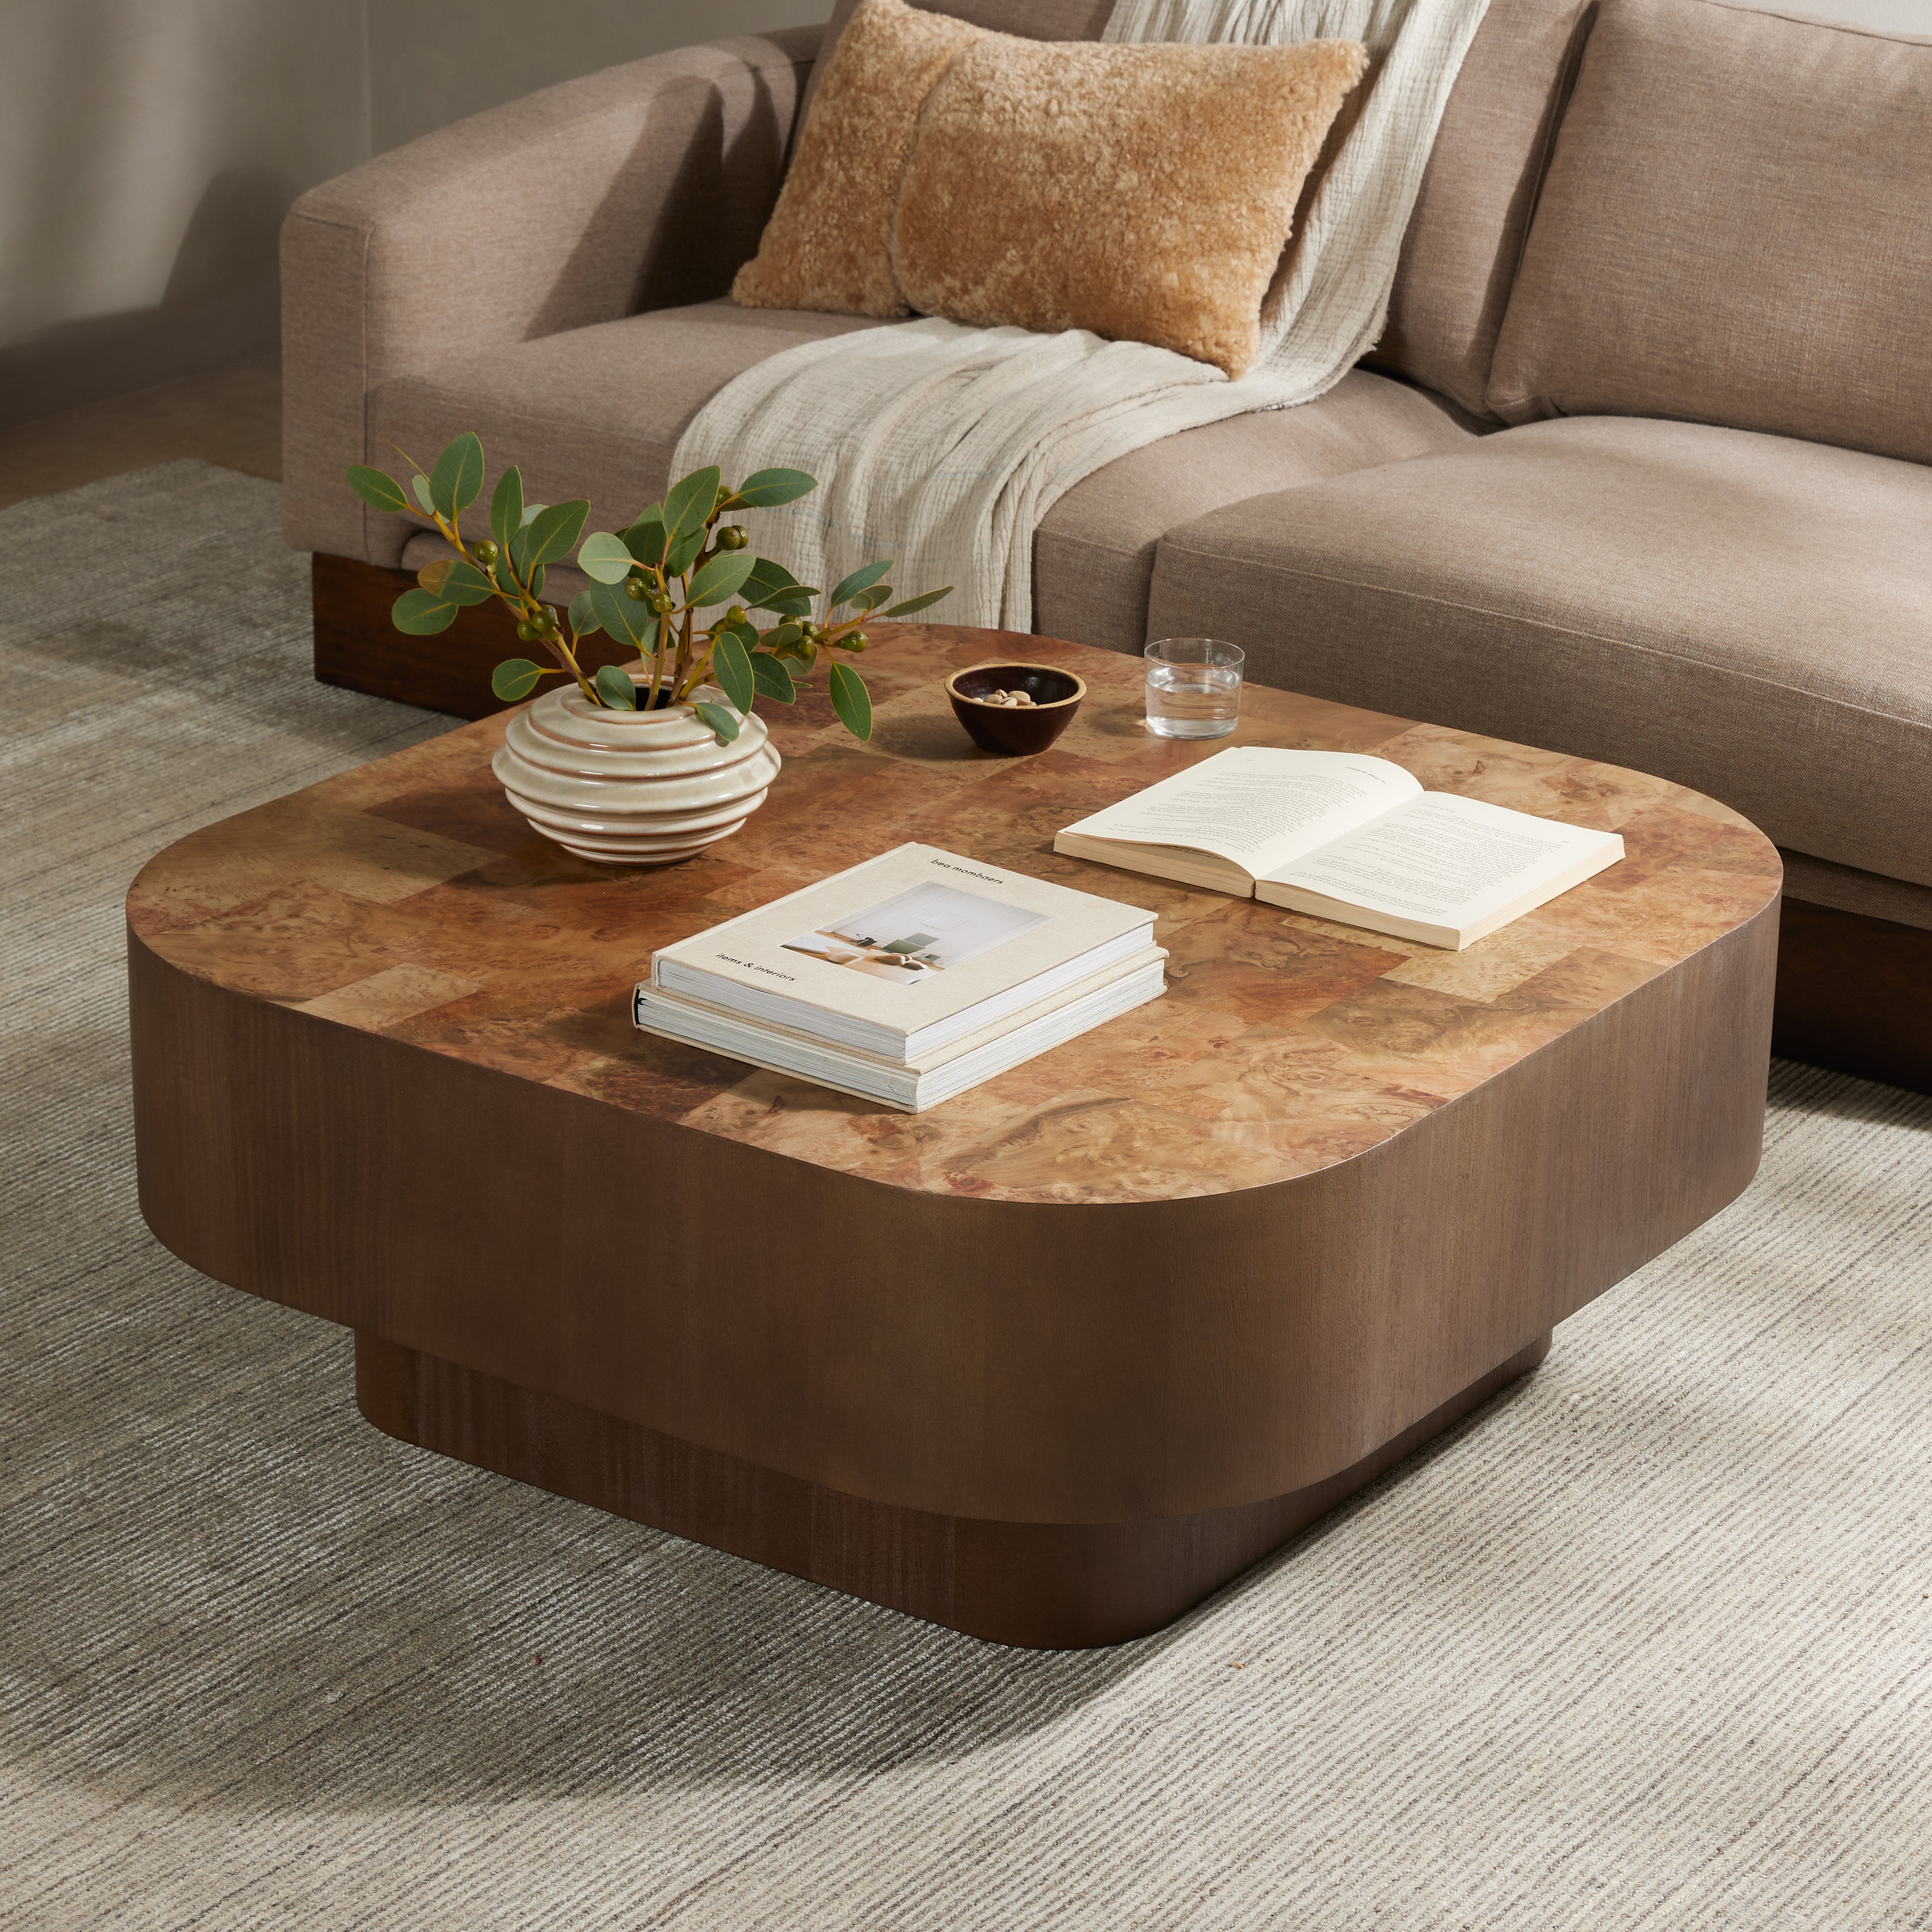 Made from warm-toned burl, a soft-squared tabletop features a patchwork pattern to bring novel movement to the modern coffee table. Veneer sides and an inset base complete a beautifully light look. Amethyst Home provides interior design, new construction, custom furniture, and area rugs in the Omaha metro area.